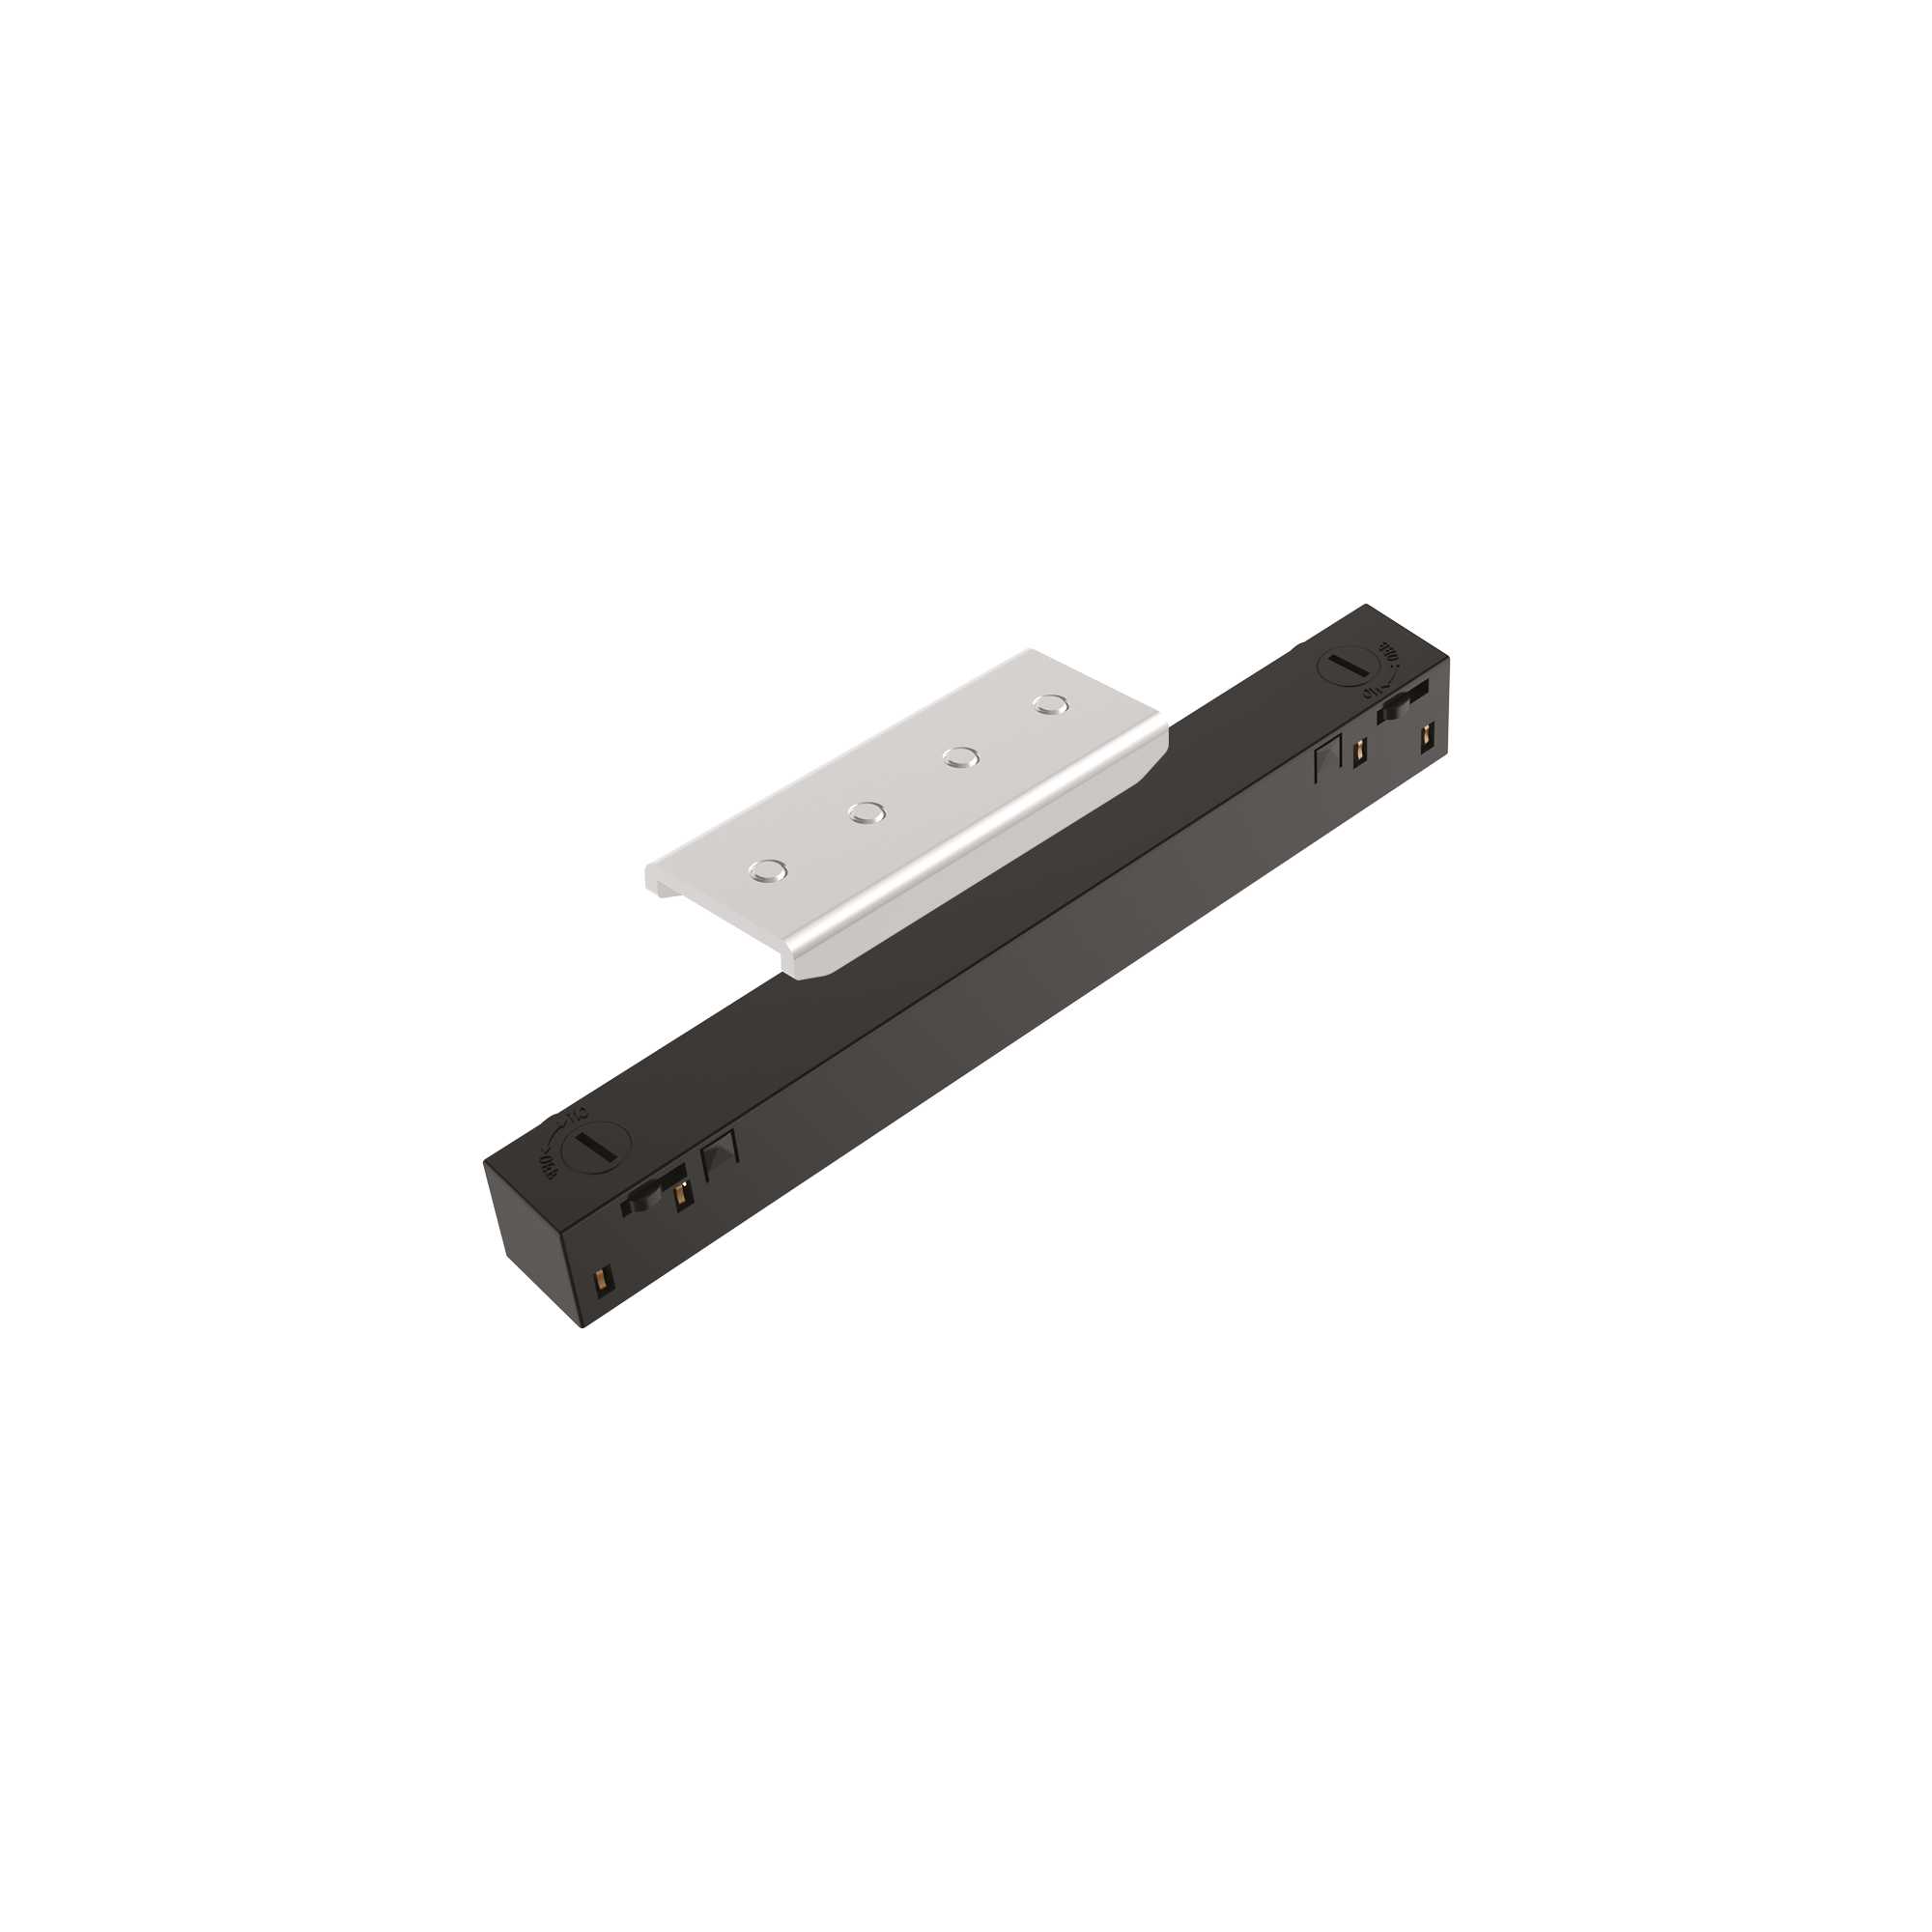 EGO RECESSED LINEAR CONNECTOR ON-OFF BK